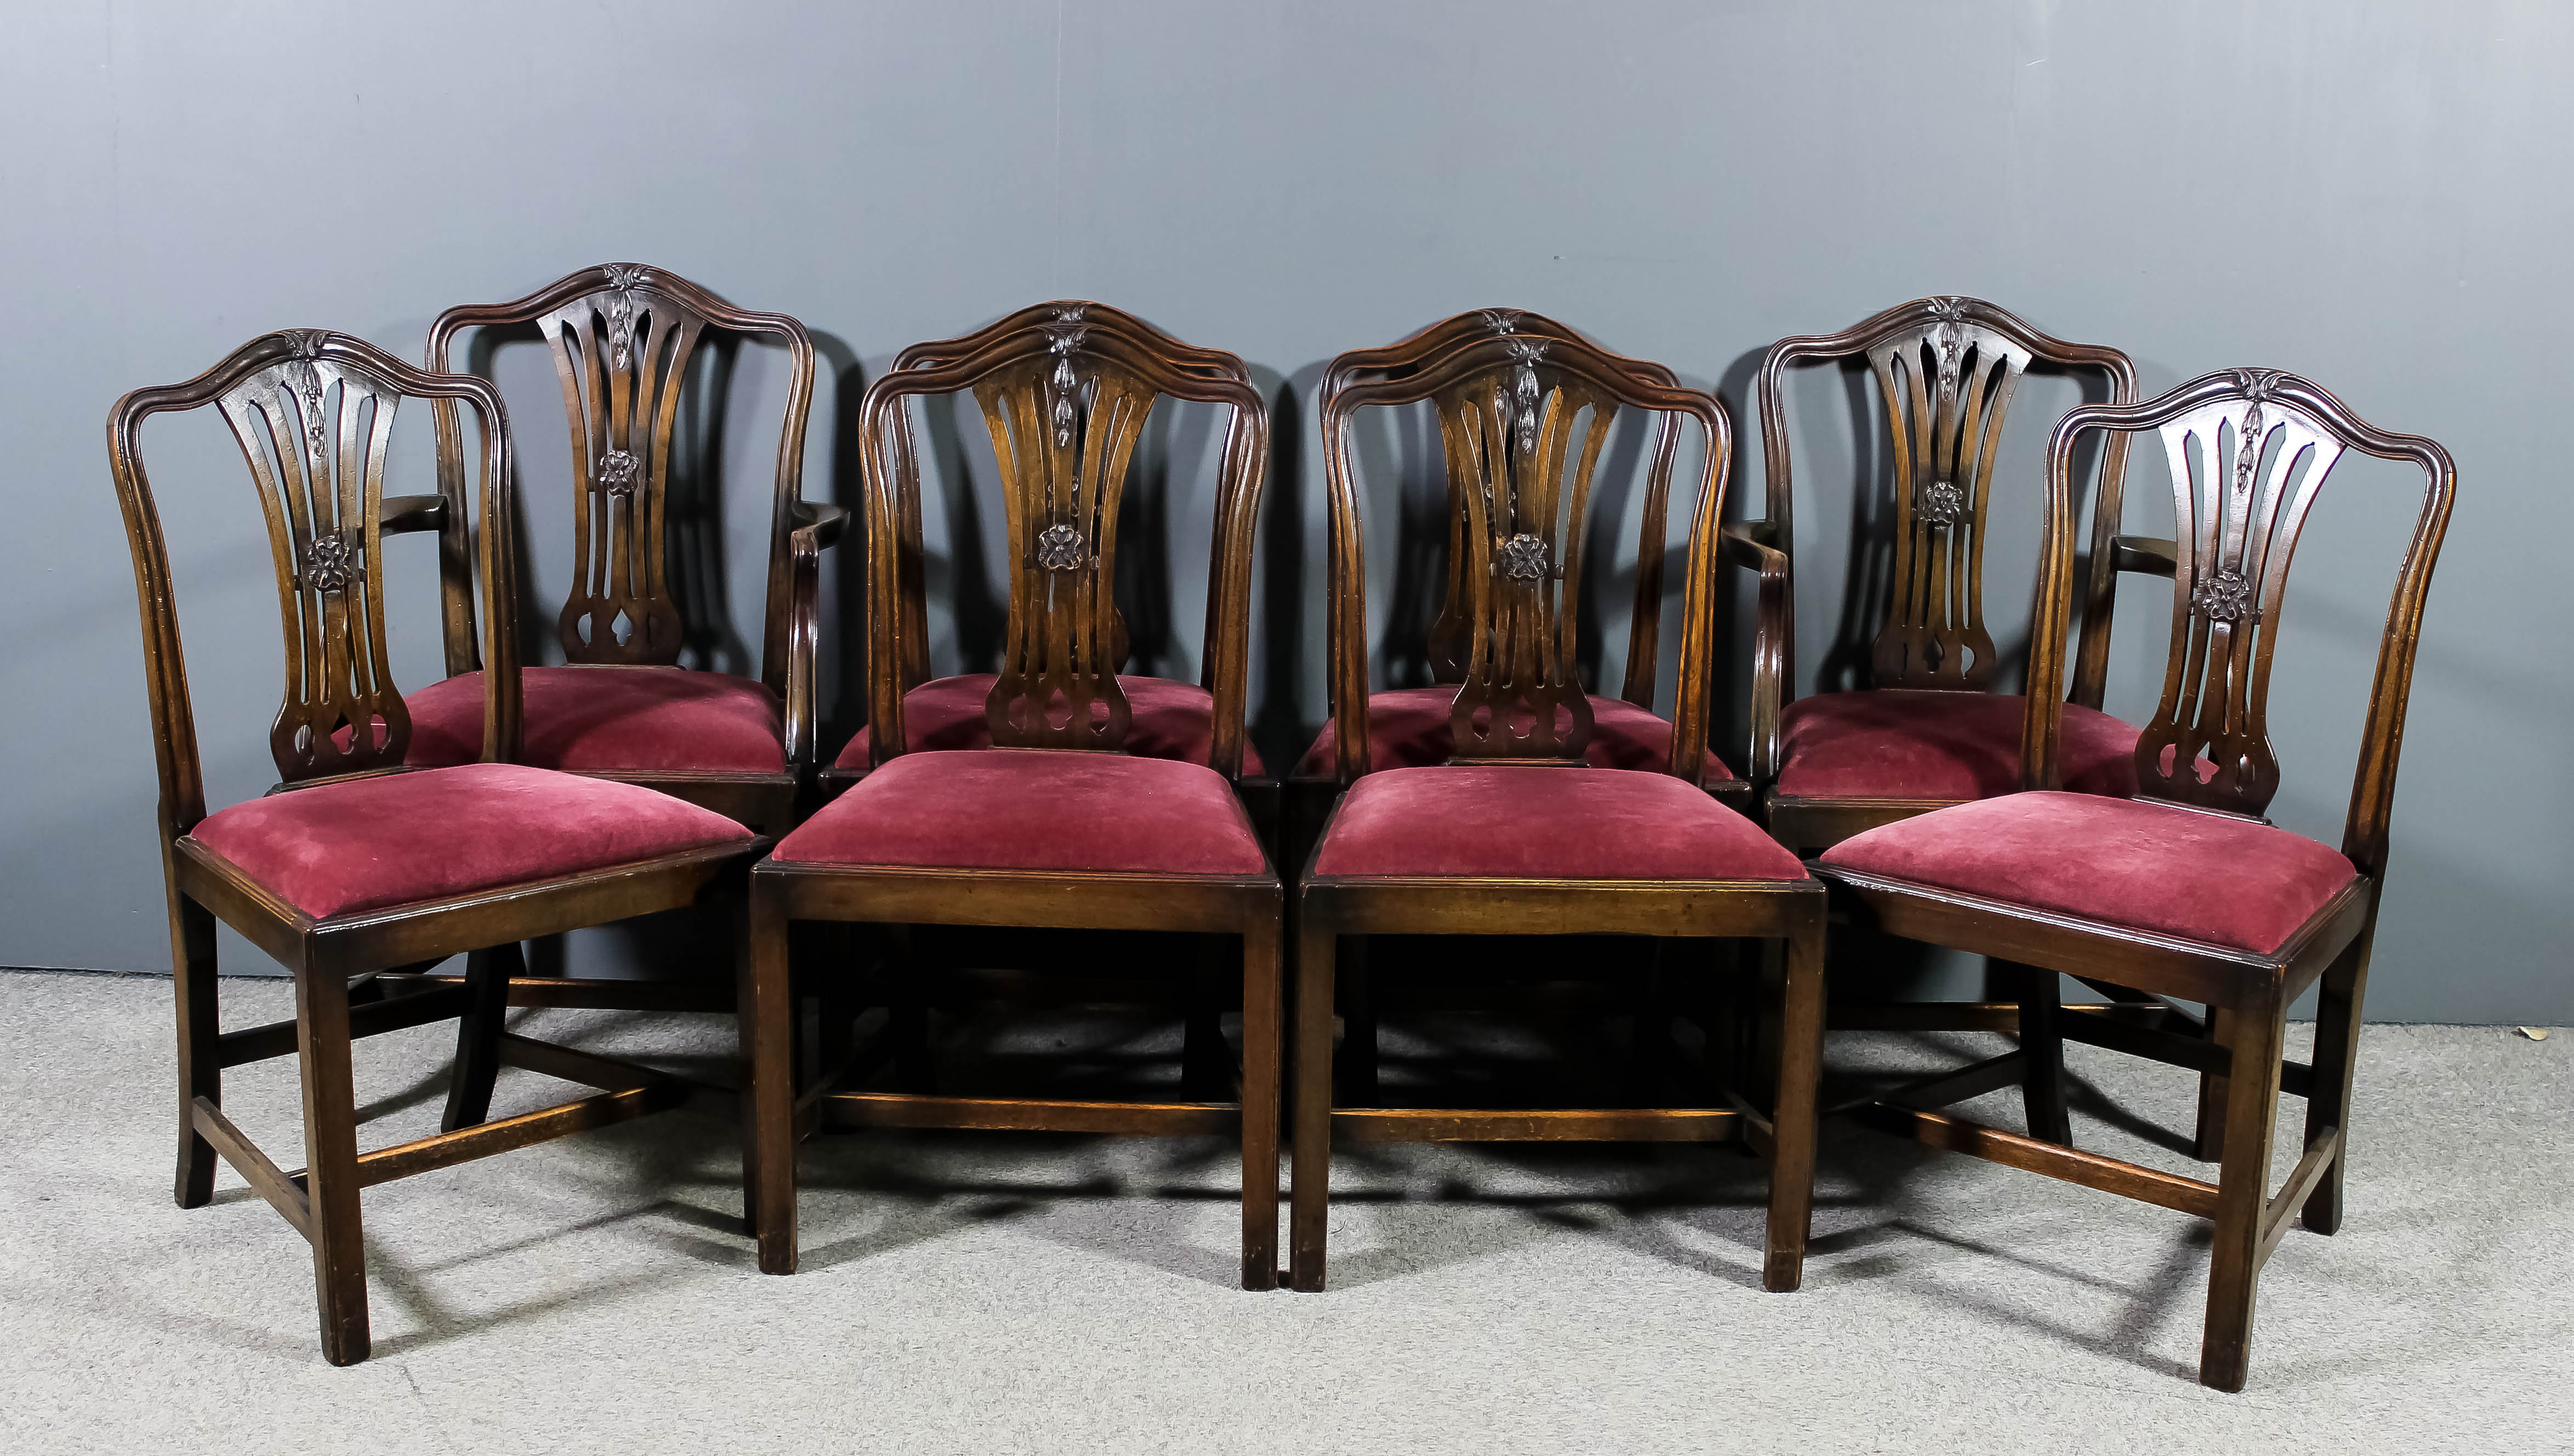 A set of eight 1920s mahogany dining chairs of "Hepplewhite" design (including two armchairs),